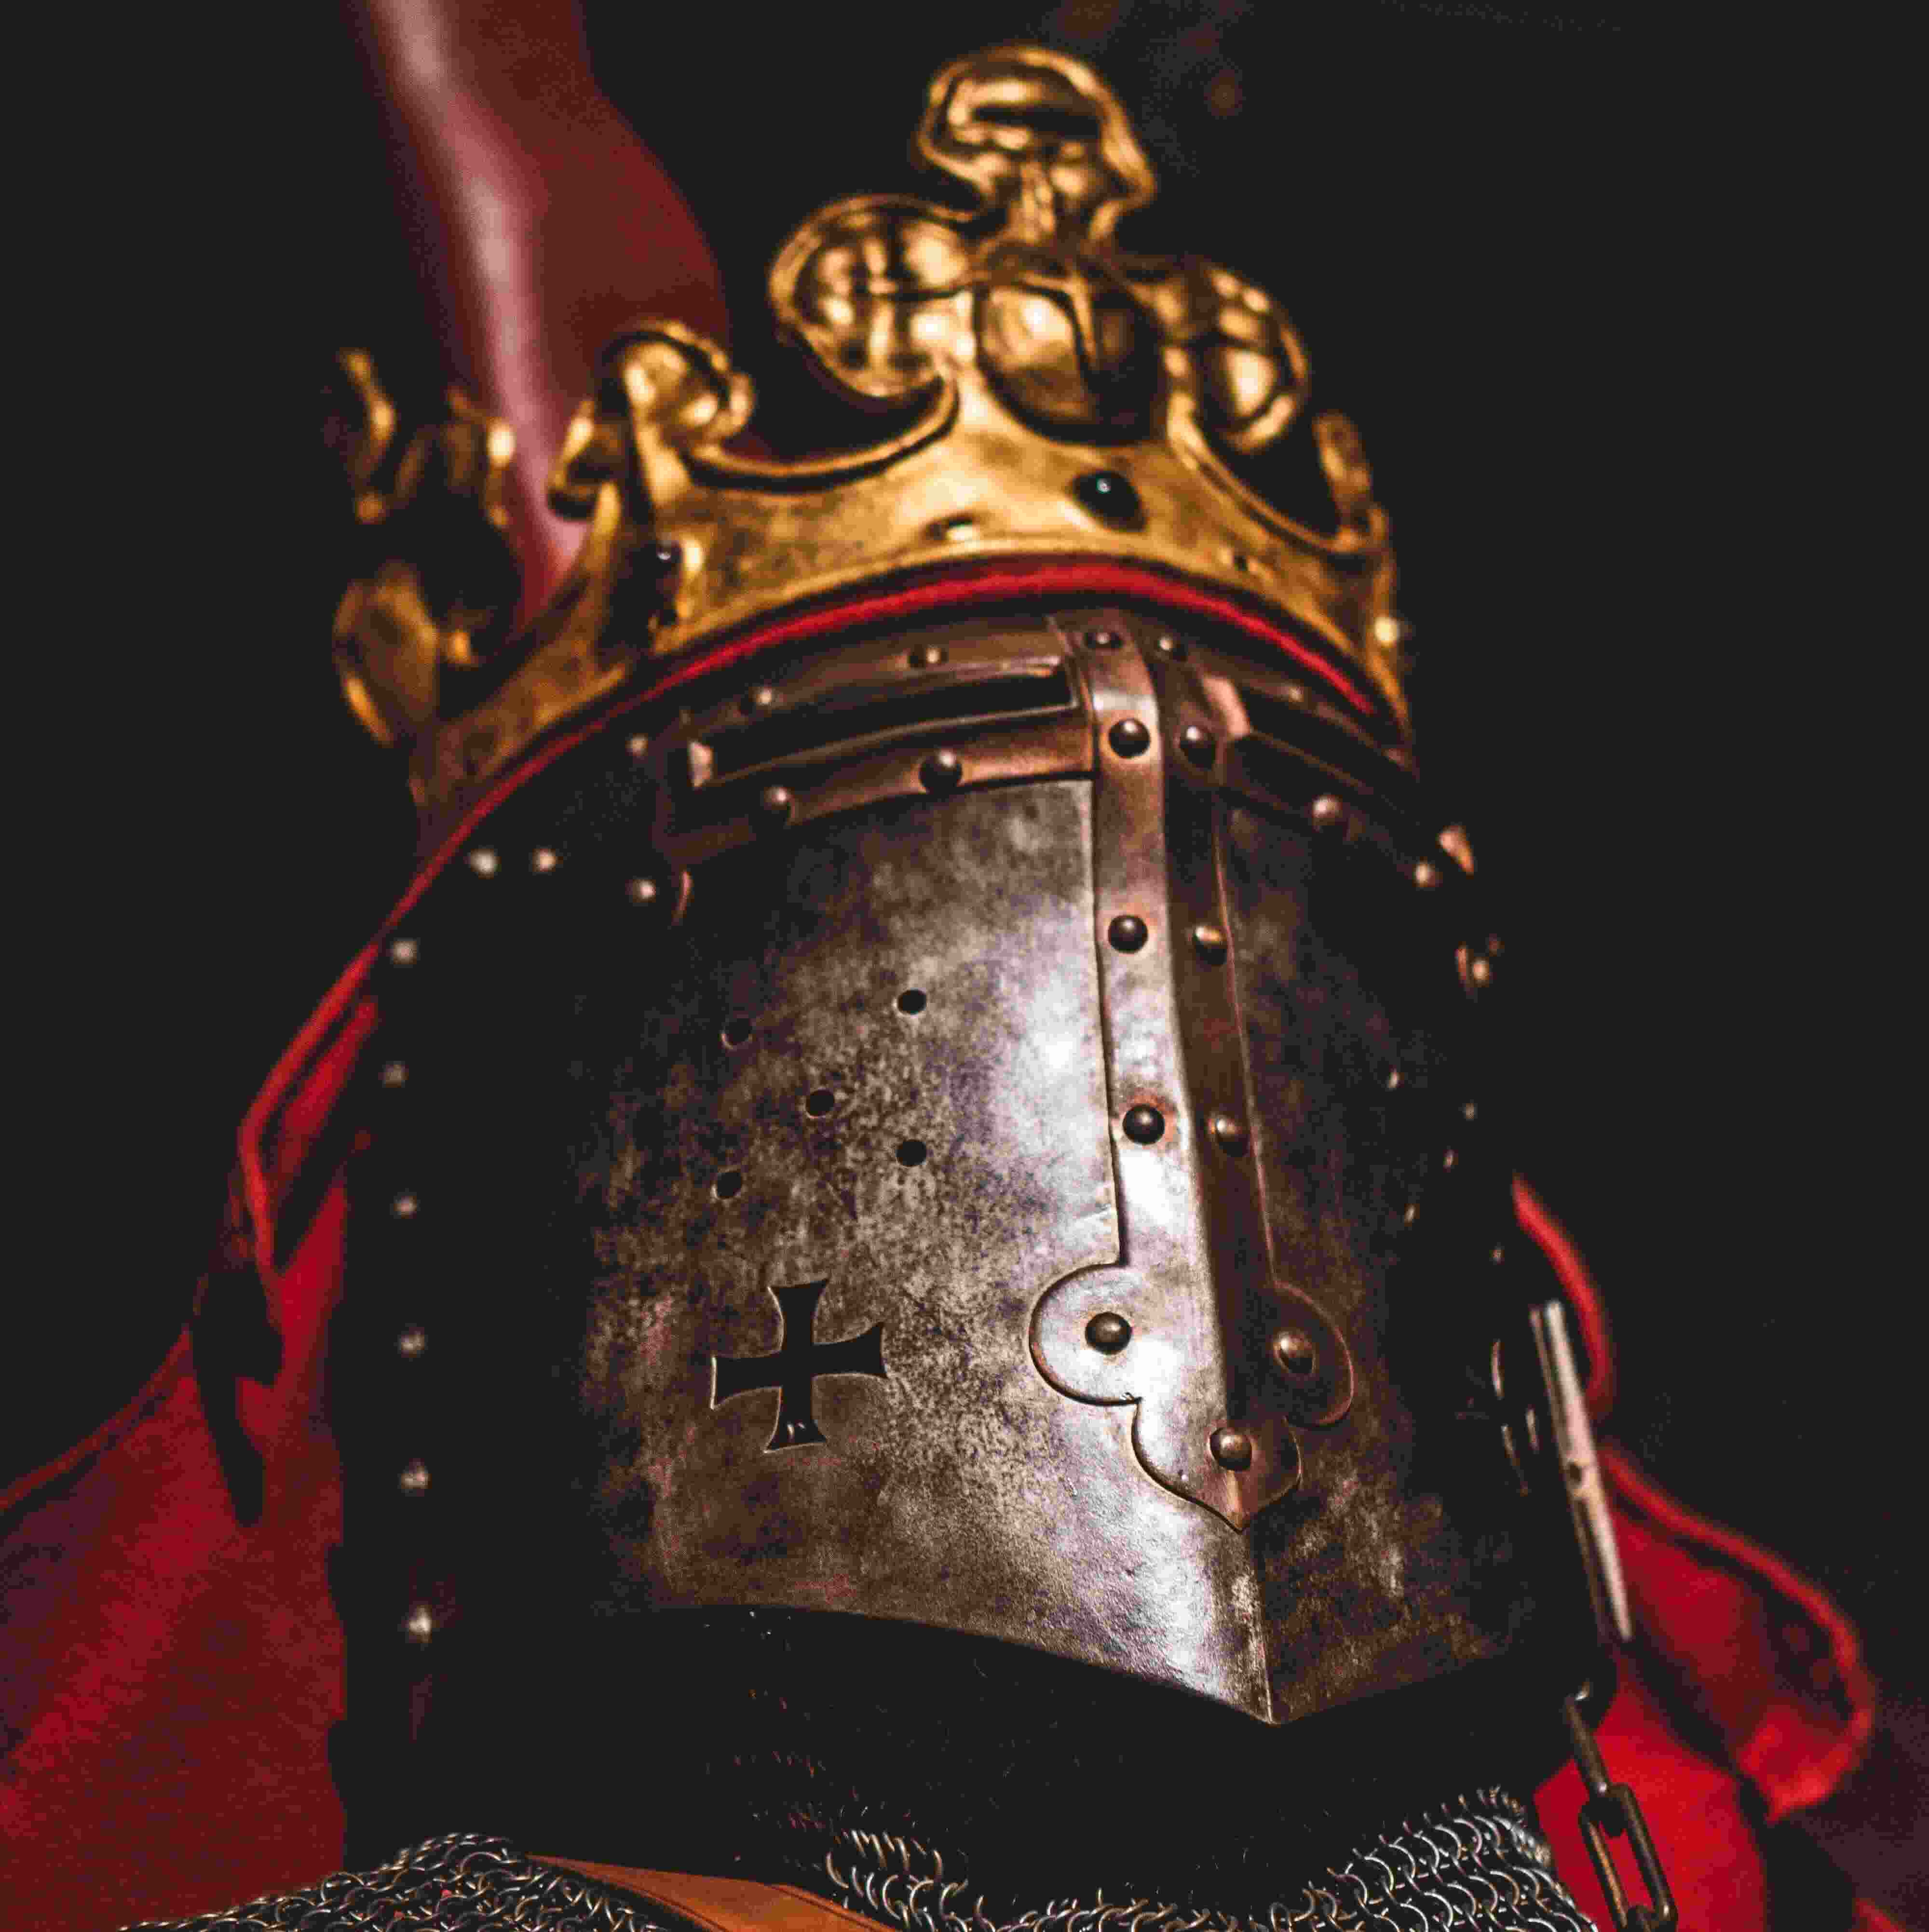 Medieval armour and bejewelled crown